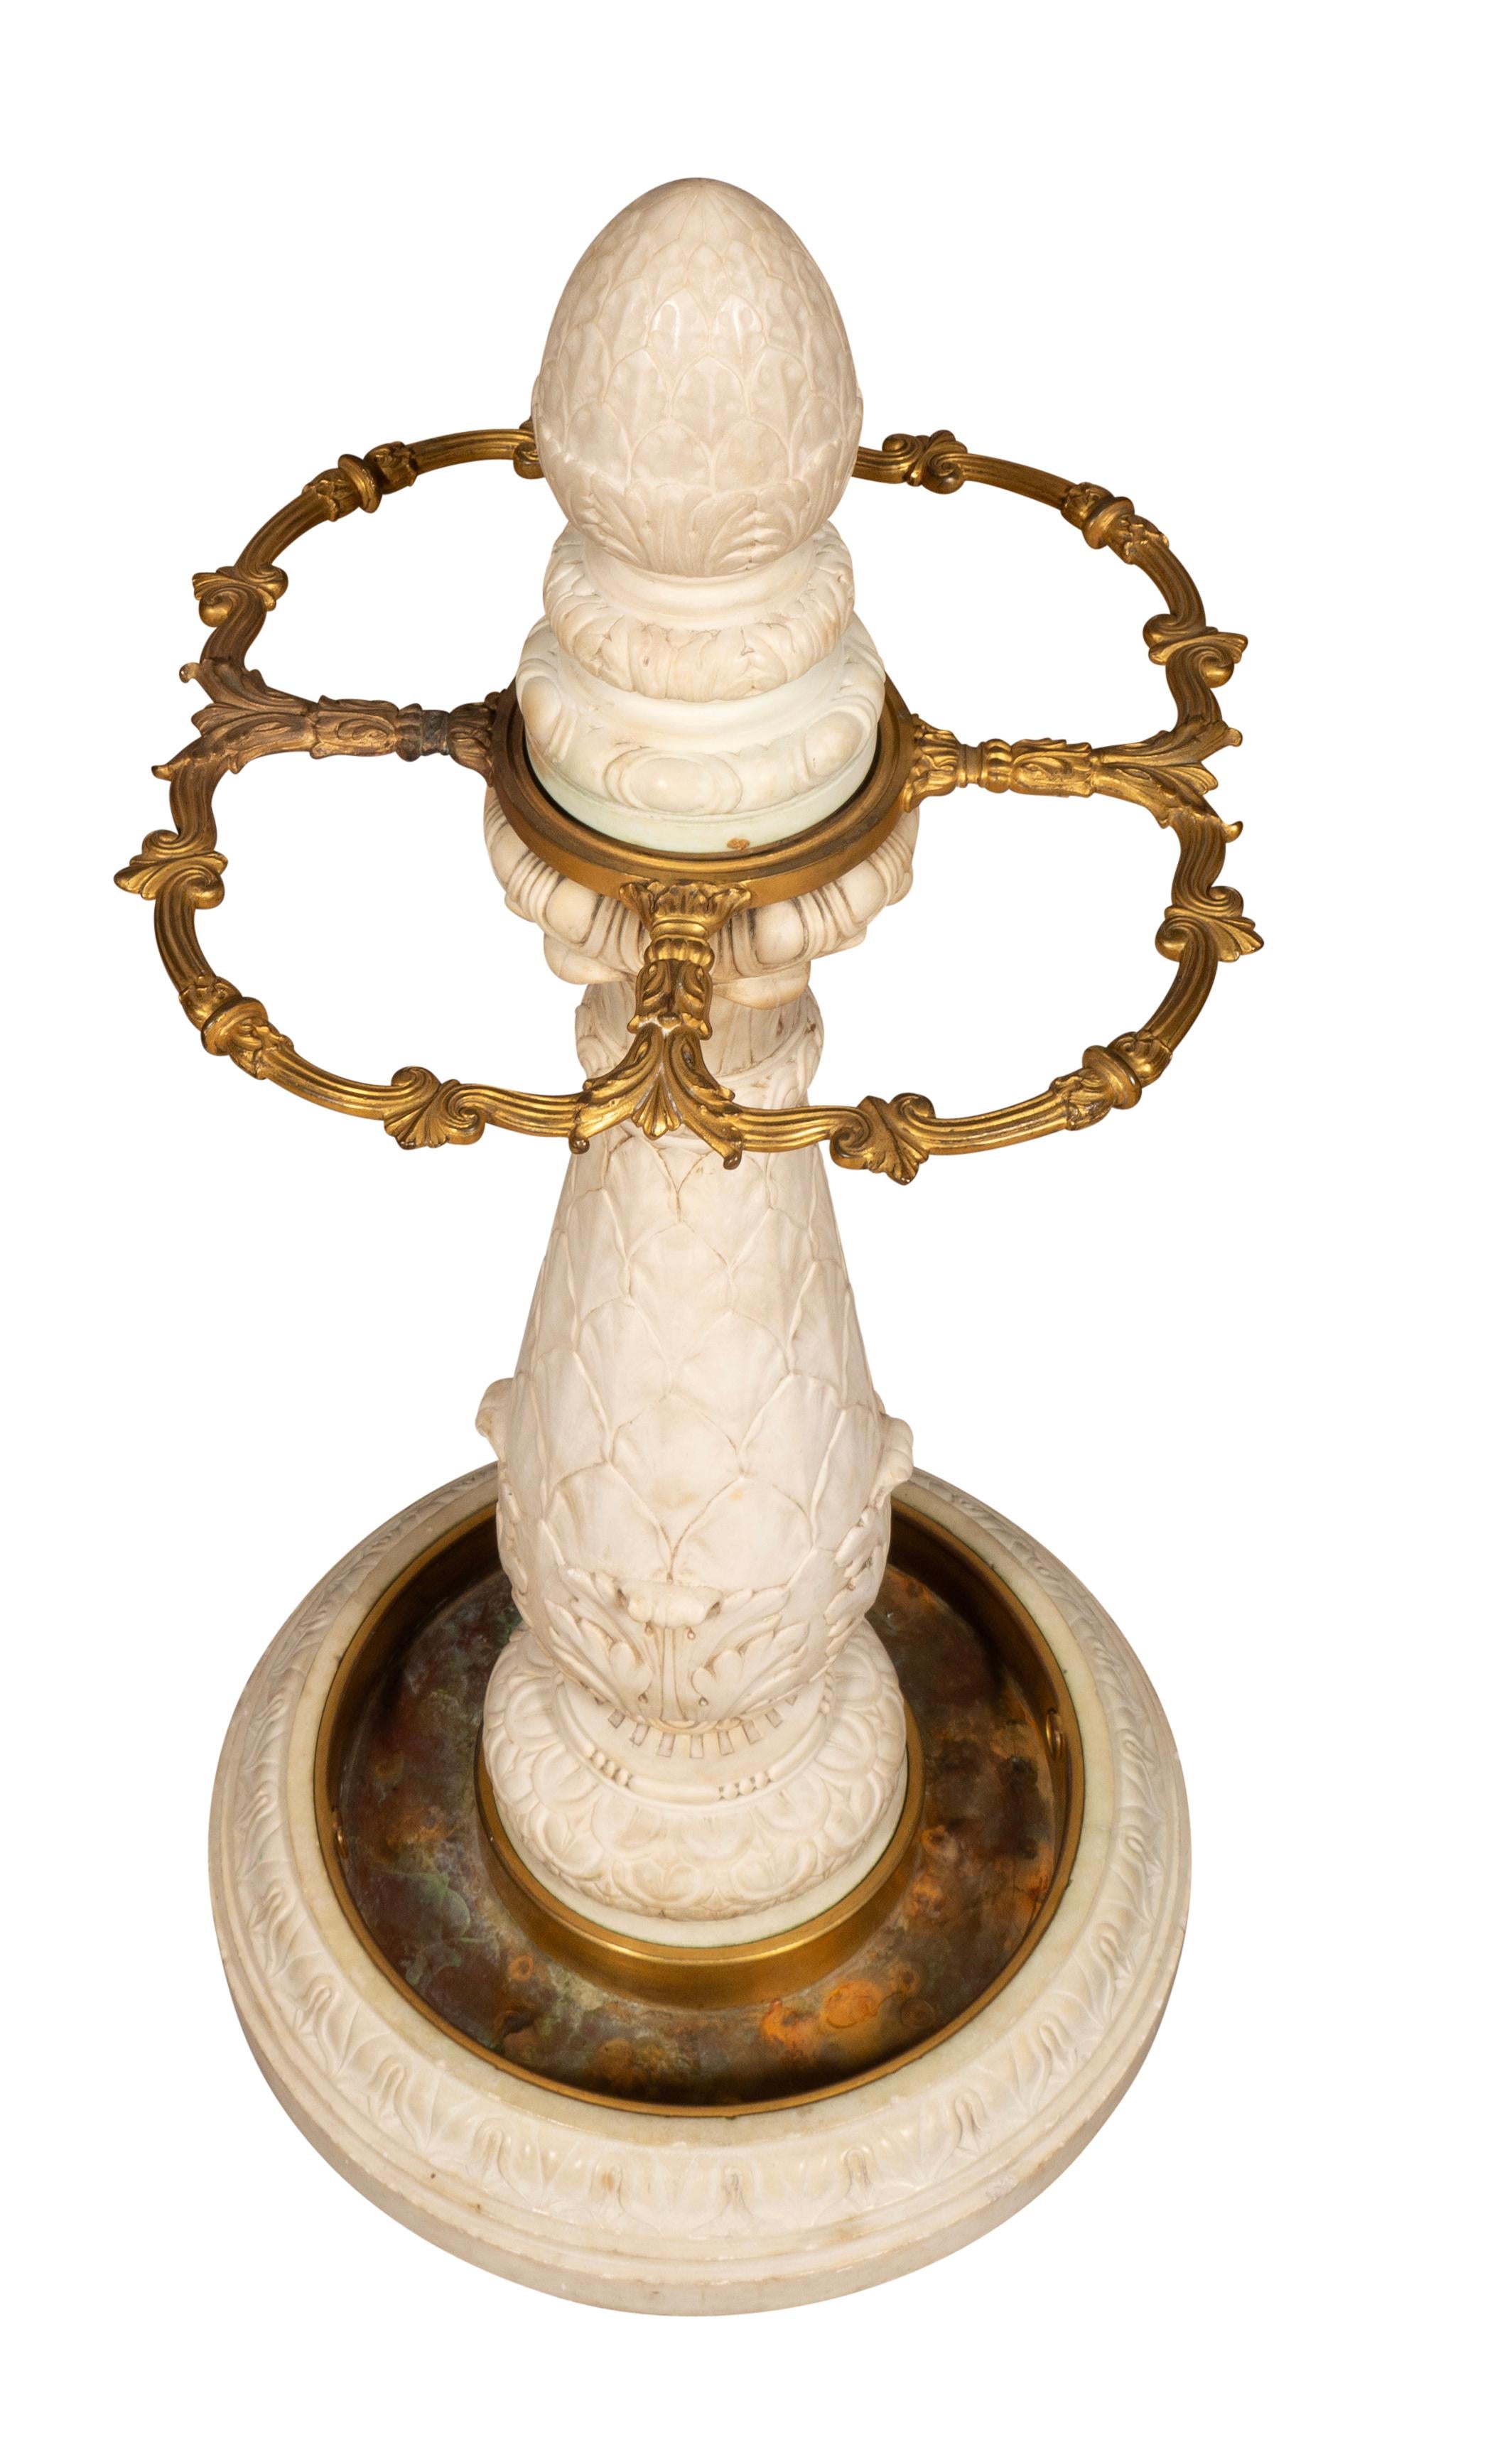 This rare and fabulous umbrella stand one of very few made likely for one of the gilded age families mansions. Caldwell supplied such architects as Mead Mckim and White, Carrere and Hastings and clients including the Frick, Morgan, Carnegie etc.